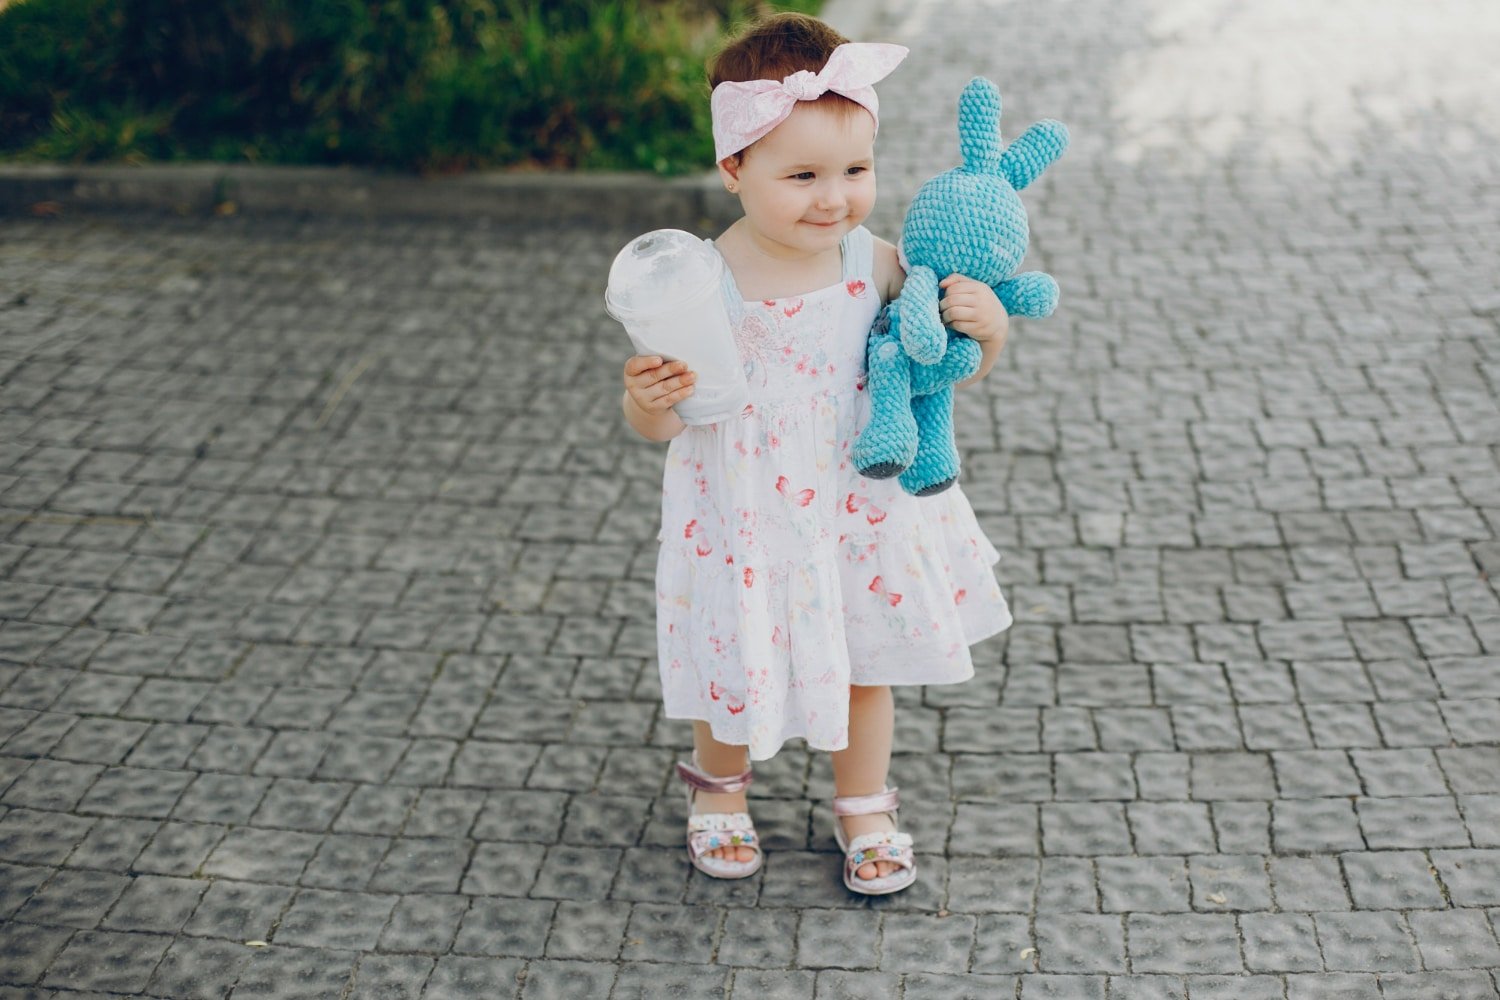 Dress Your Little Ones In RuffleButts’s Cute Children’s Clothing